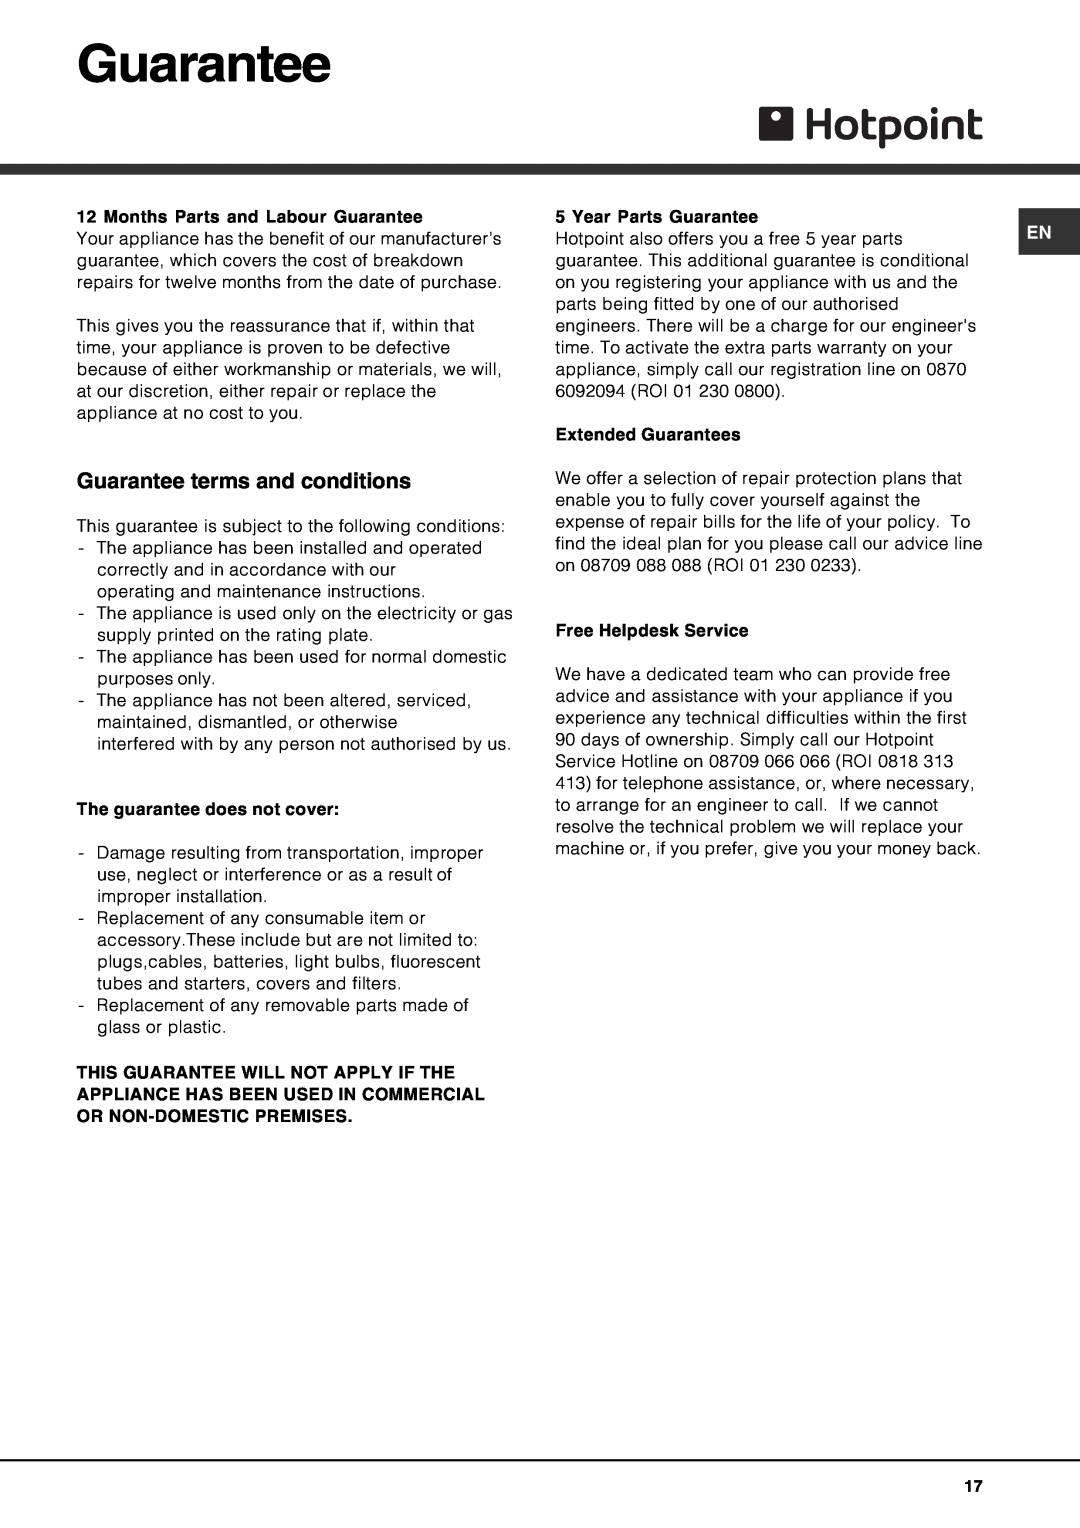 Hotpoint FDD 912 manual Guarantee terms and conditions 